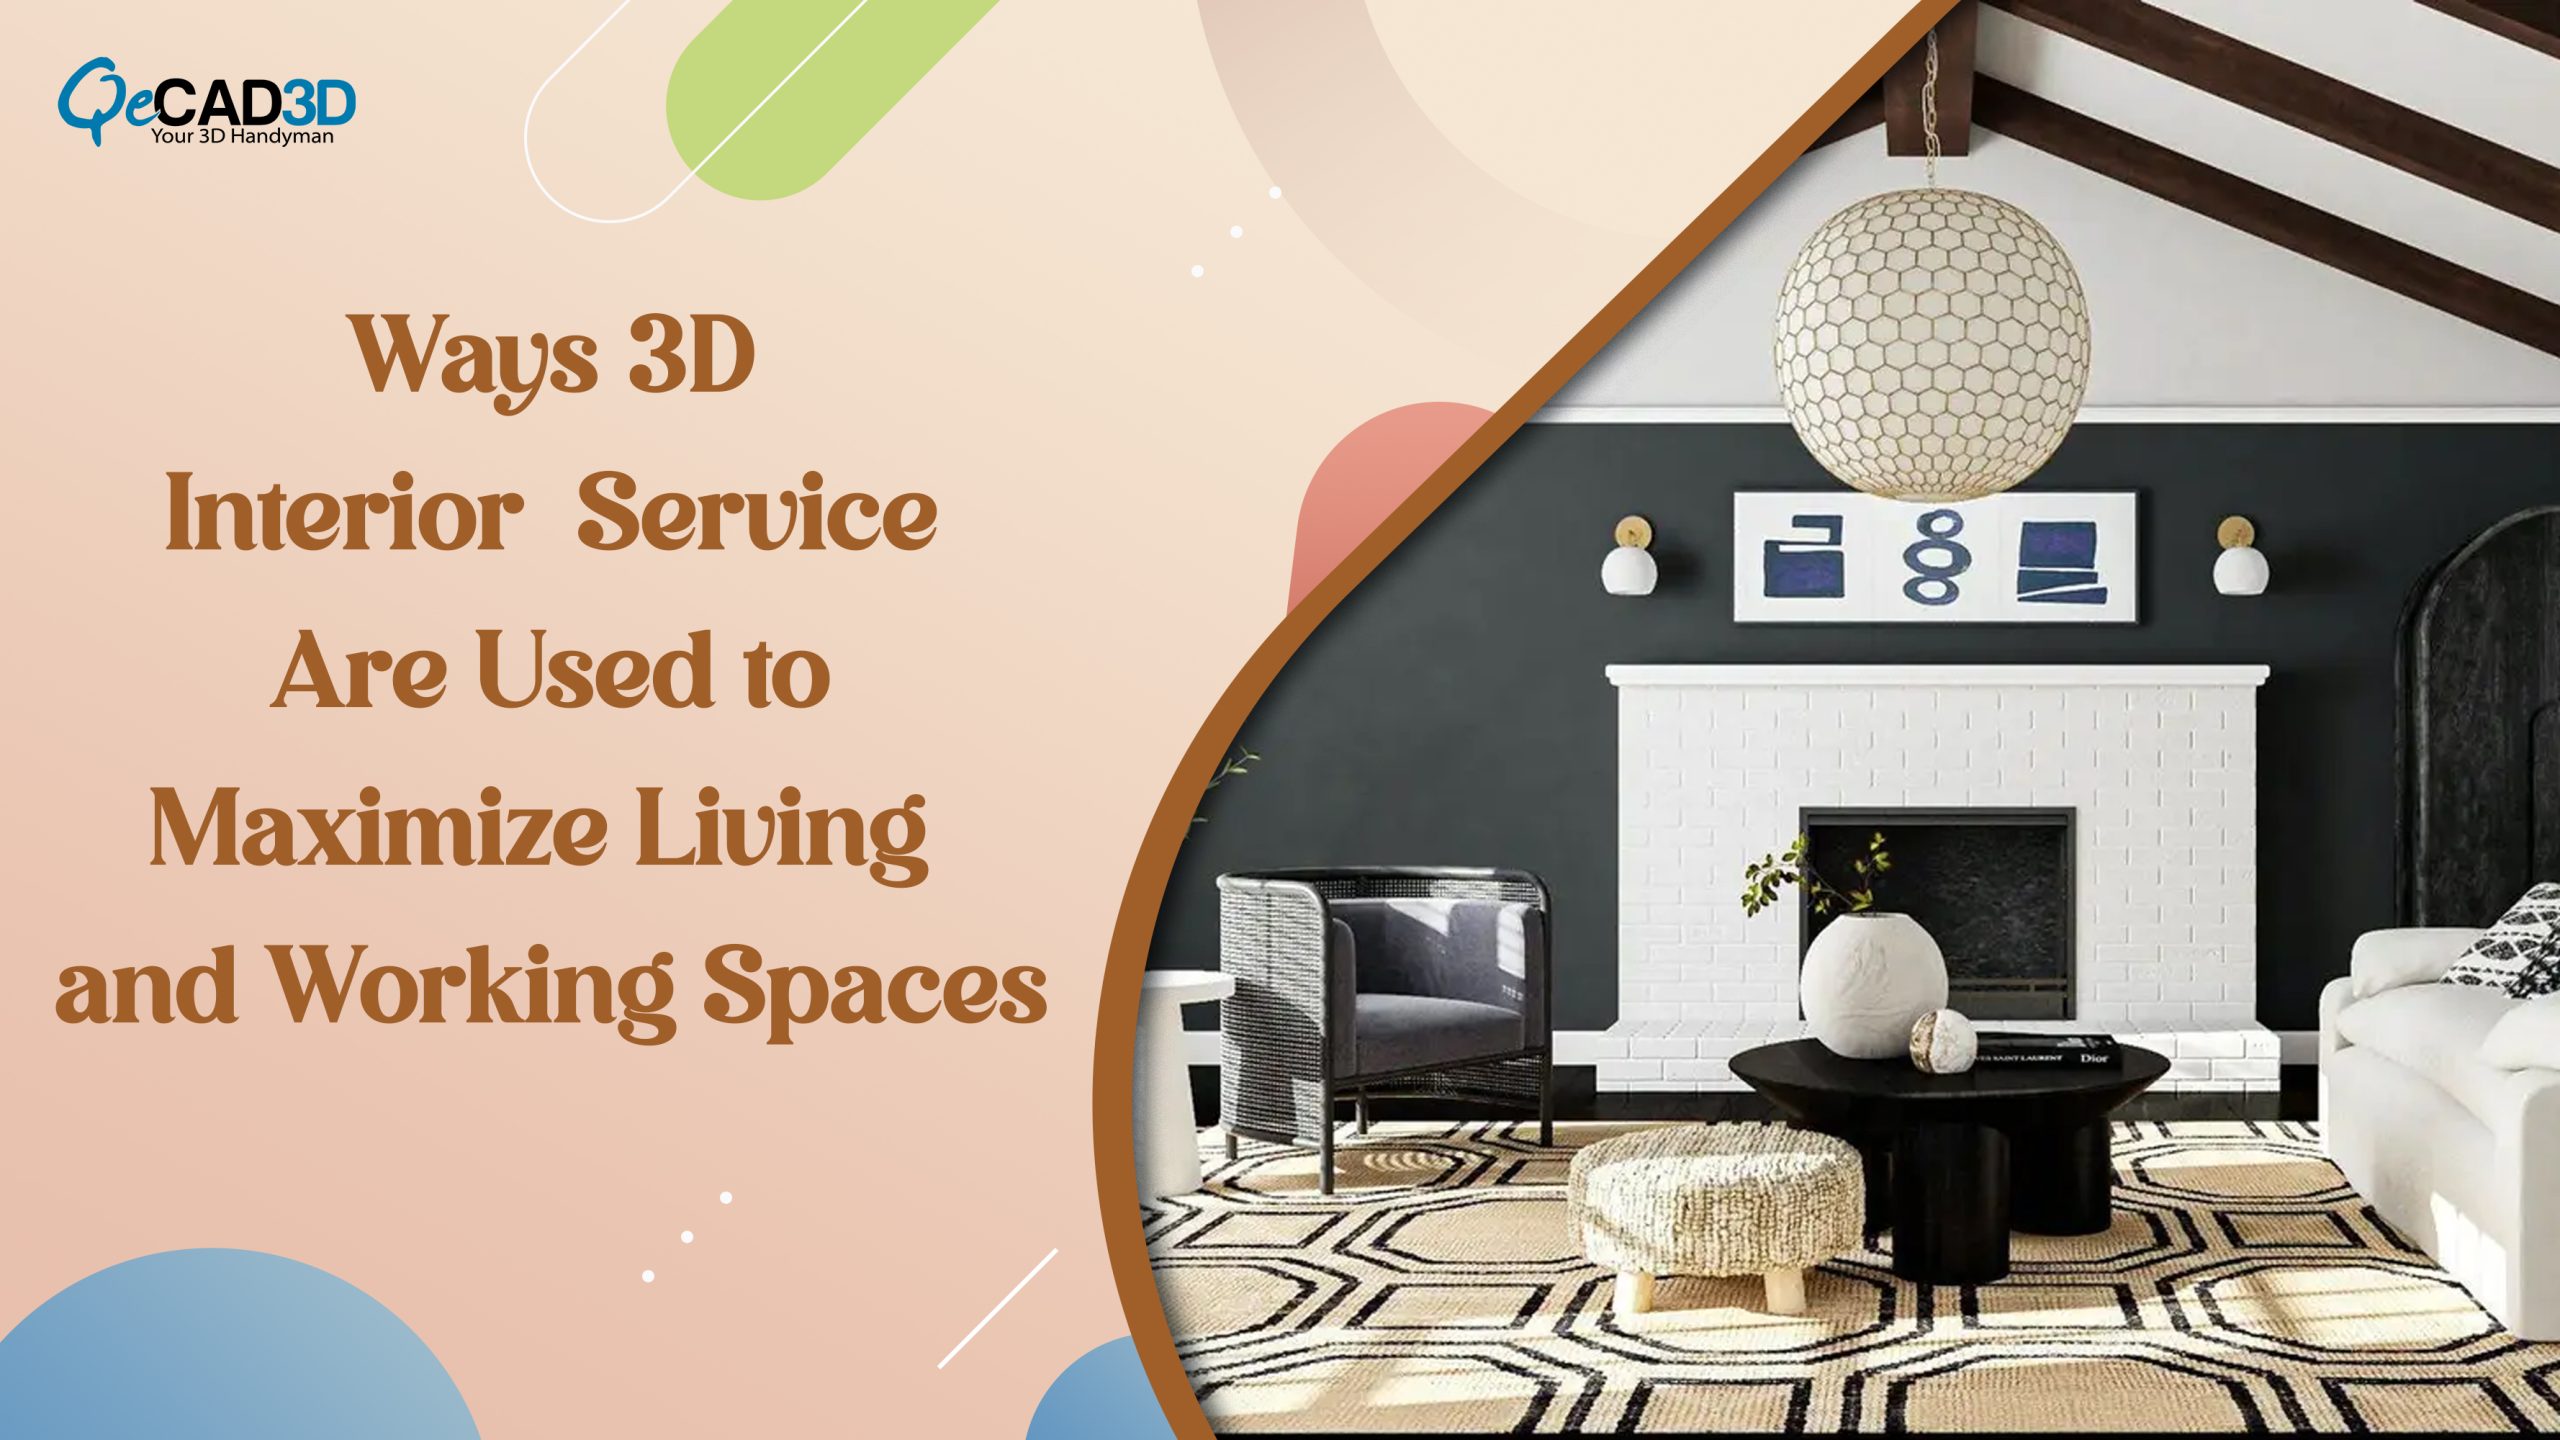 Ways 3D Interior Services Are Used to Maximize Living and Working Spaces